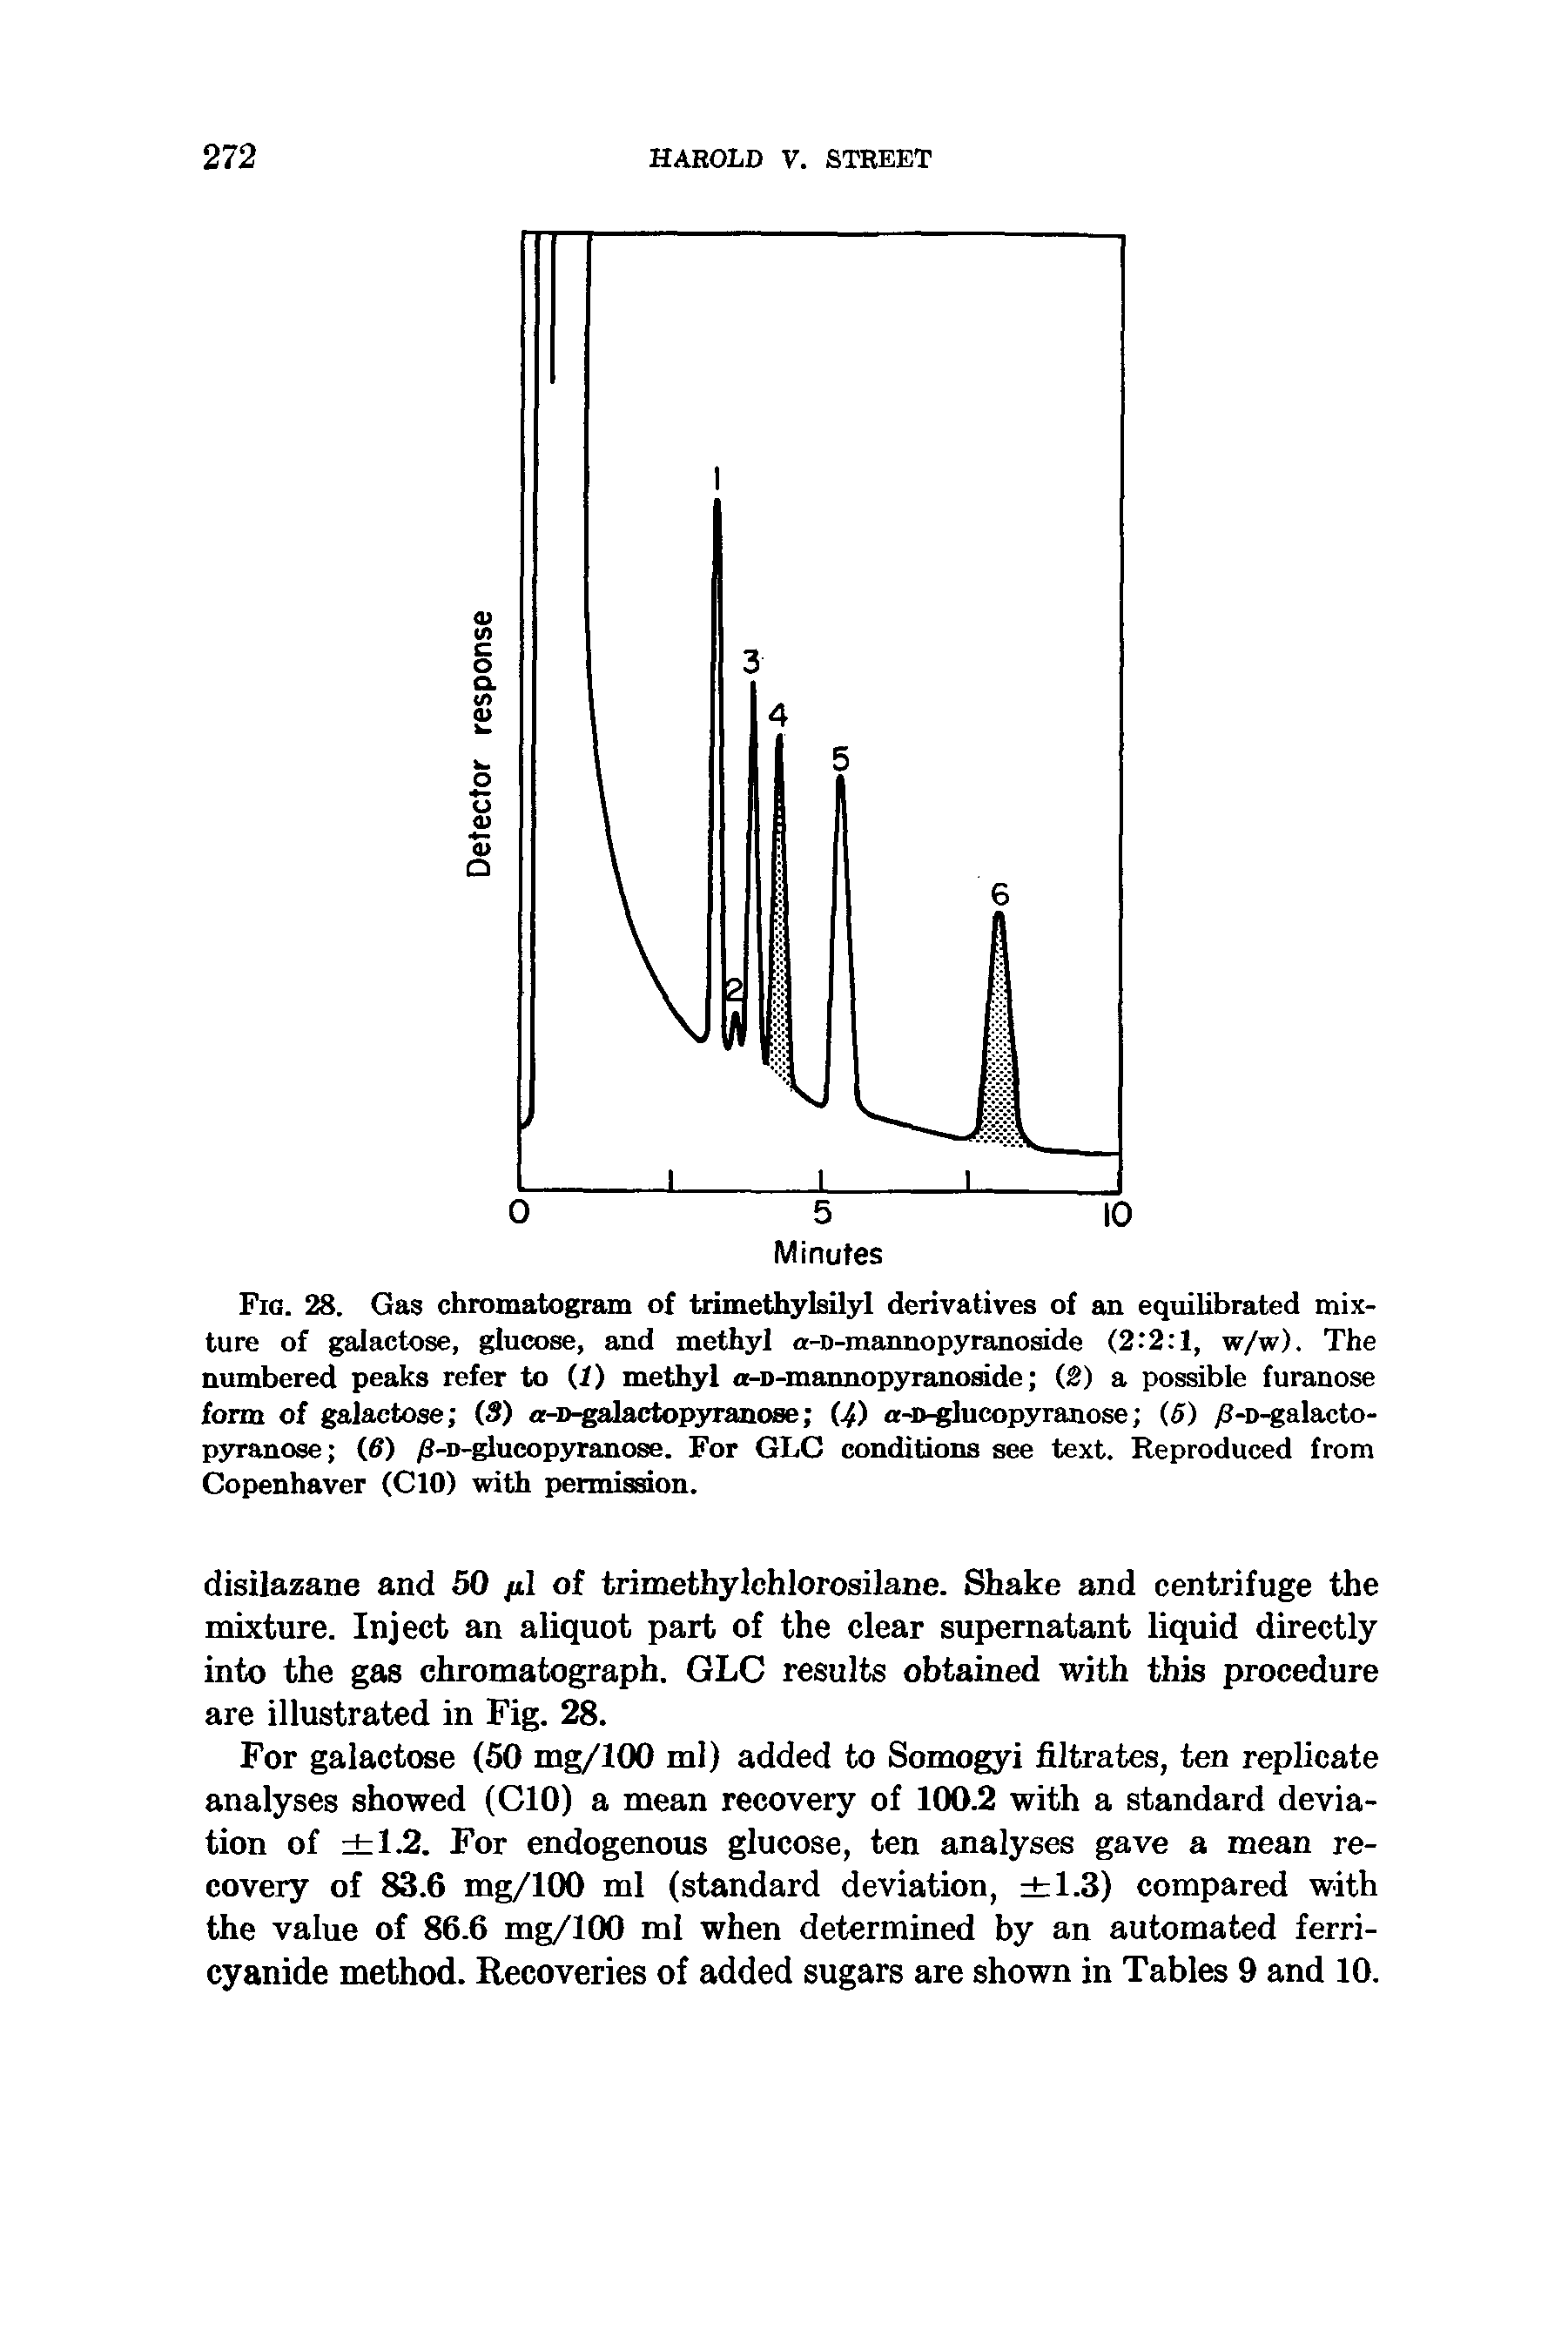 Fig. 28. Gas chromatogram of trimethylsilyl derivatives of an equilibrated mixture of galactose, glucose, and methyl a-D-mannopyranoside (2 2 1, w/w). The numbered peaks refer to (f) methyl a-o-mannopyranoside (2) a possible furanose form of galactose (3) a-D-galactopyranose (4) a- -glucopyranose (5) yS-o-galacto-P3u-anose (6) /8-n-glucopyranose. For GLC conditions see text. Reproduced from Copenhaver (CIO) with permission.